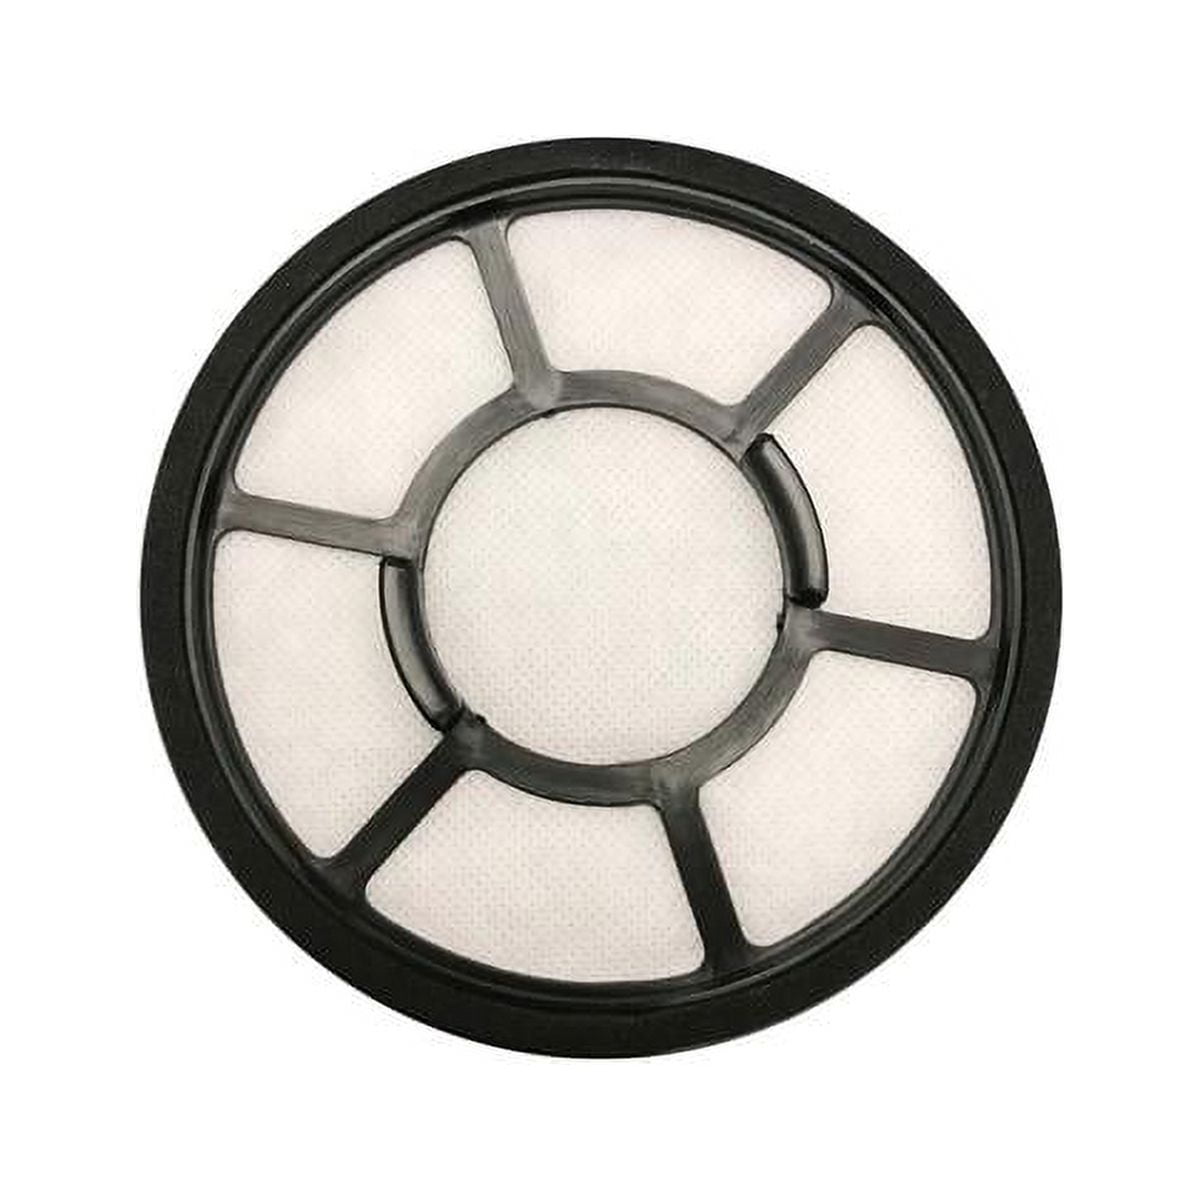 1Pack Replacement Filter for Black & Decker Power Tools VF110